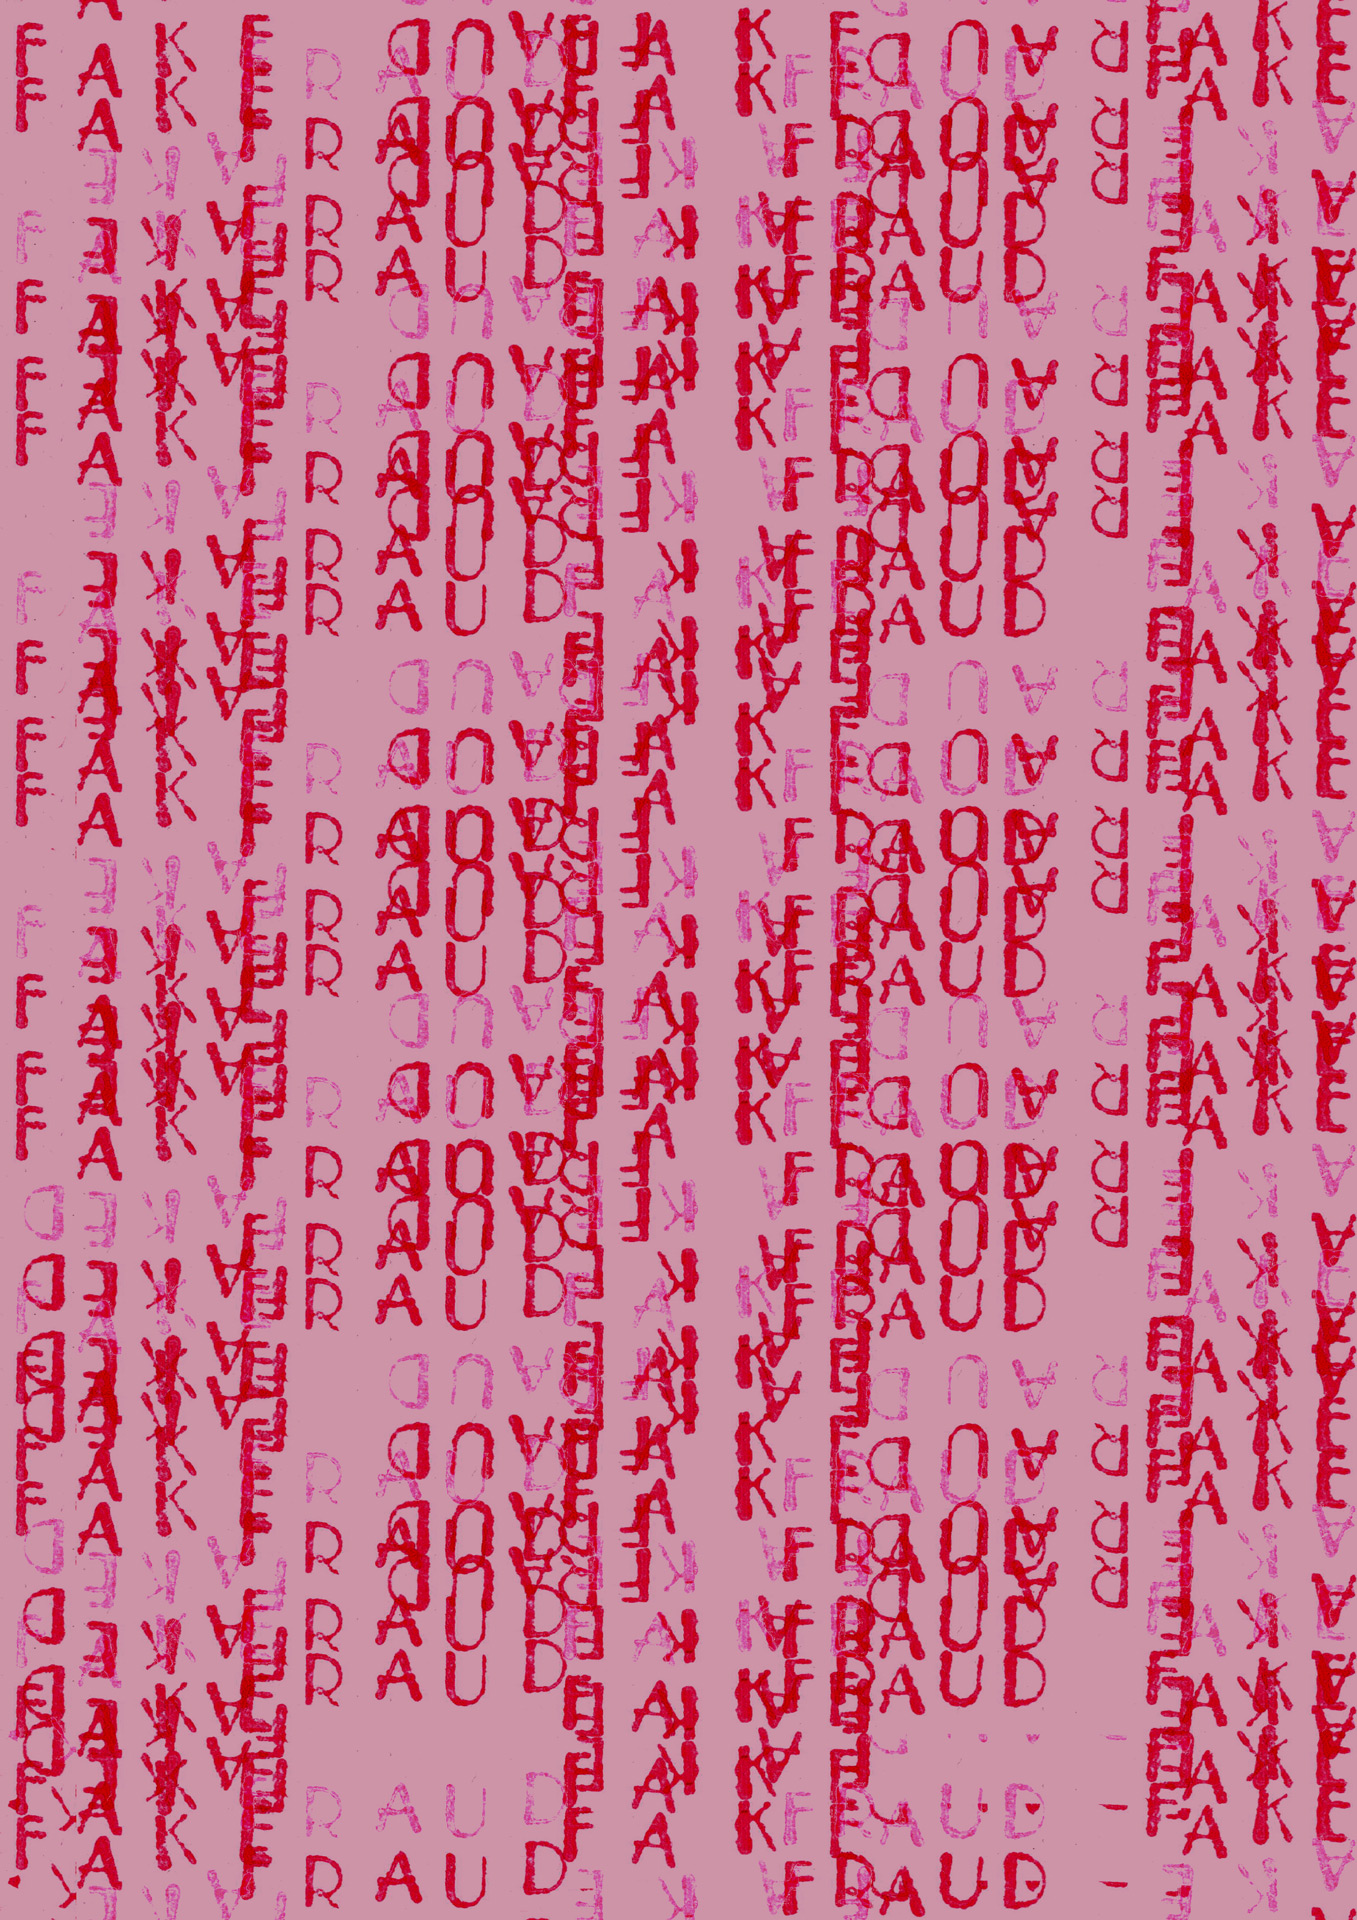 The A4 sized graphic includes distressed and bold typography of the words 'fake' and 'fraud'. The words are repeated and overlaid on top of each other, resulting in a chaotic appearance. The colours used are red and pink, and they are overlaid on a pale pink background.